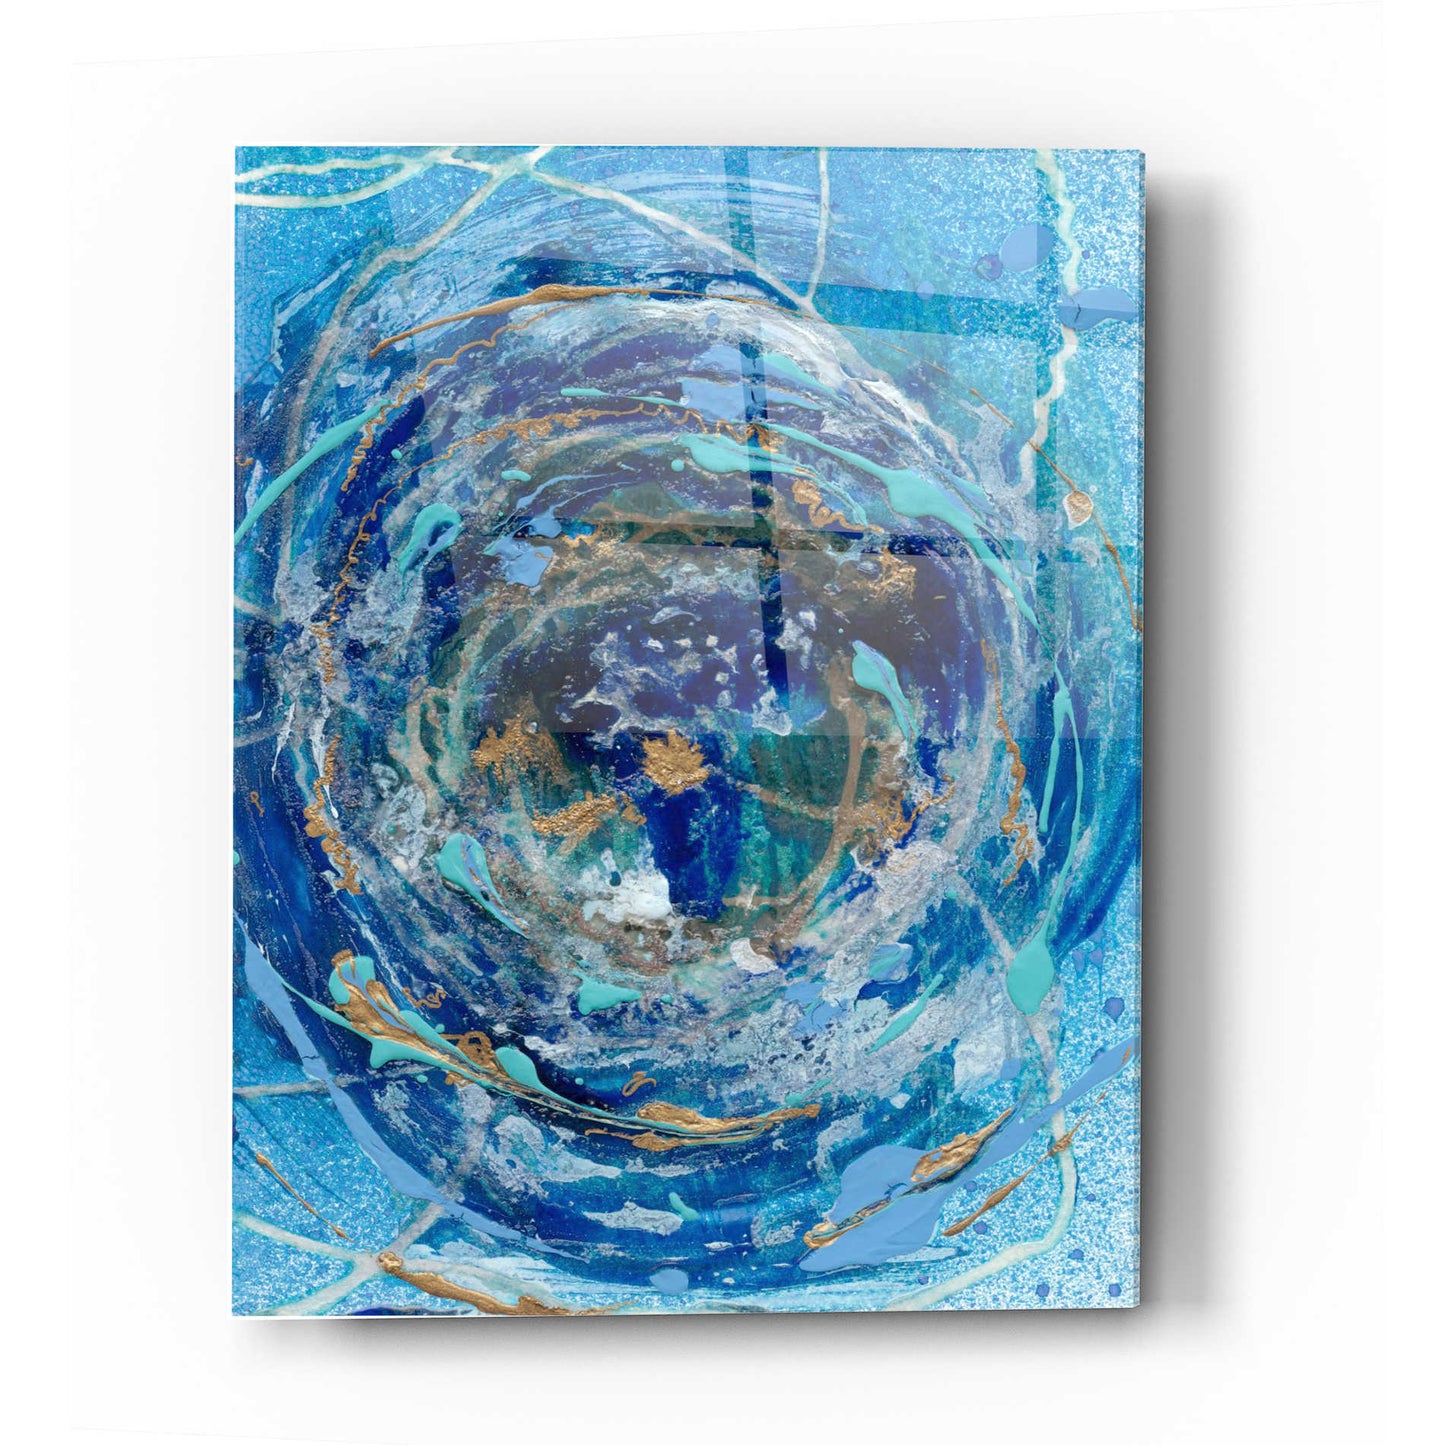 Epic Art 'Waterspout I' by Alicia Ludwig Acrylic Glass Wall Art,12x16